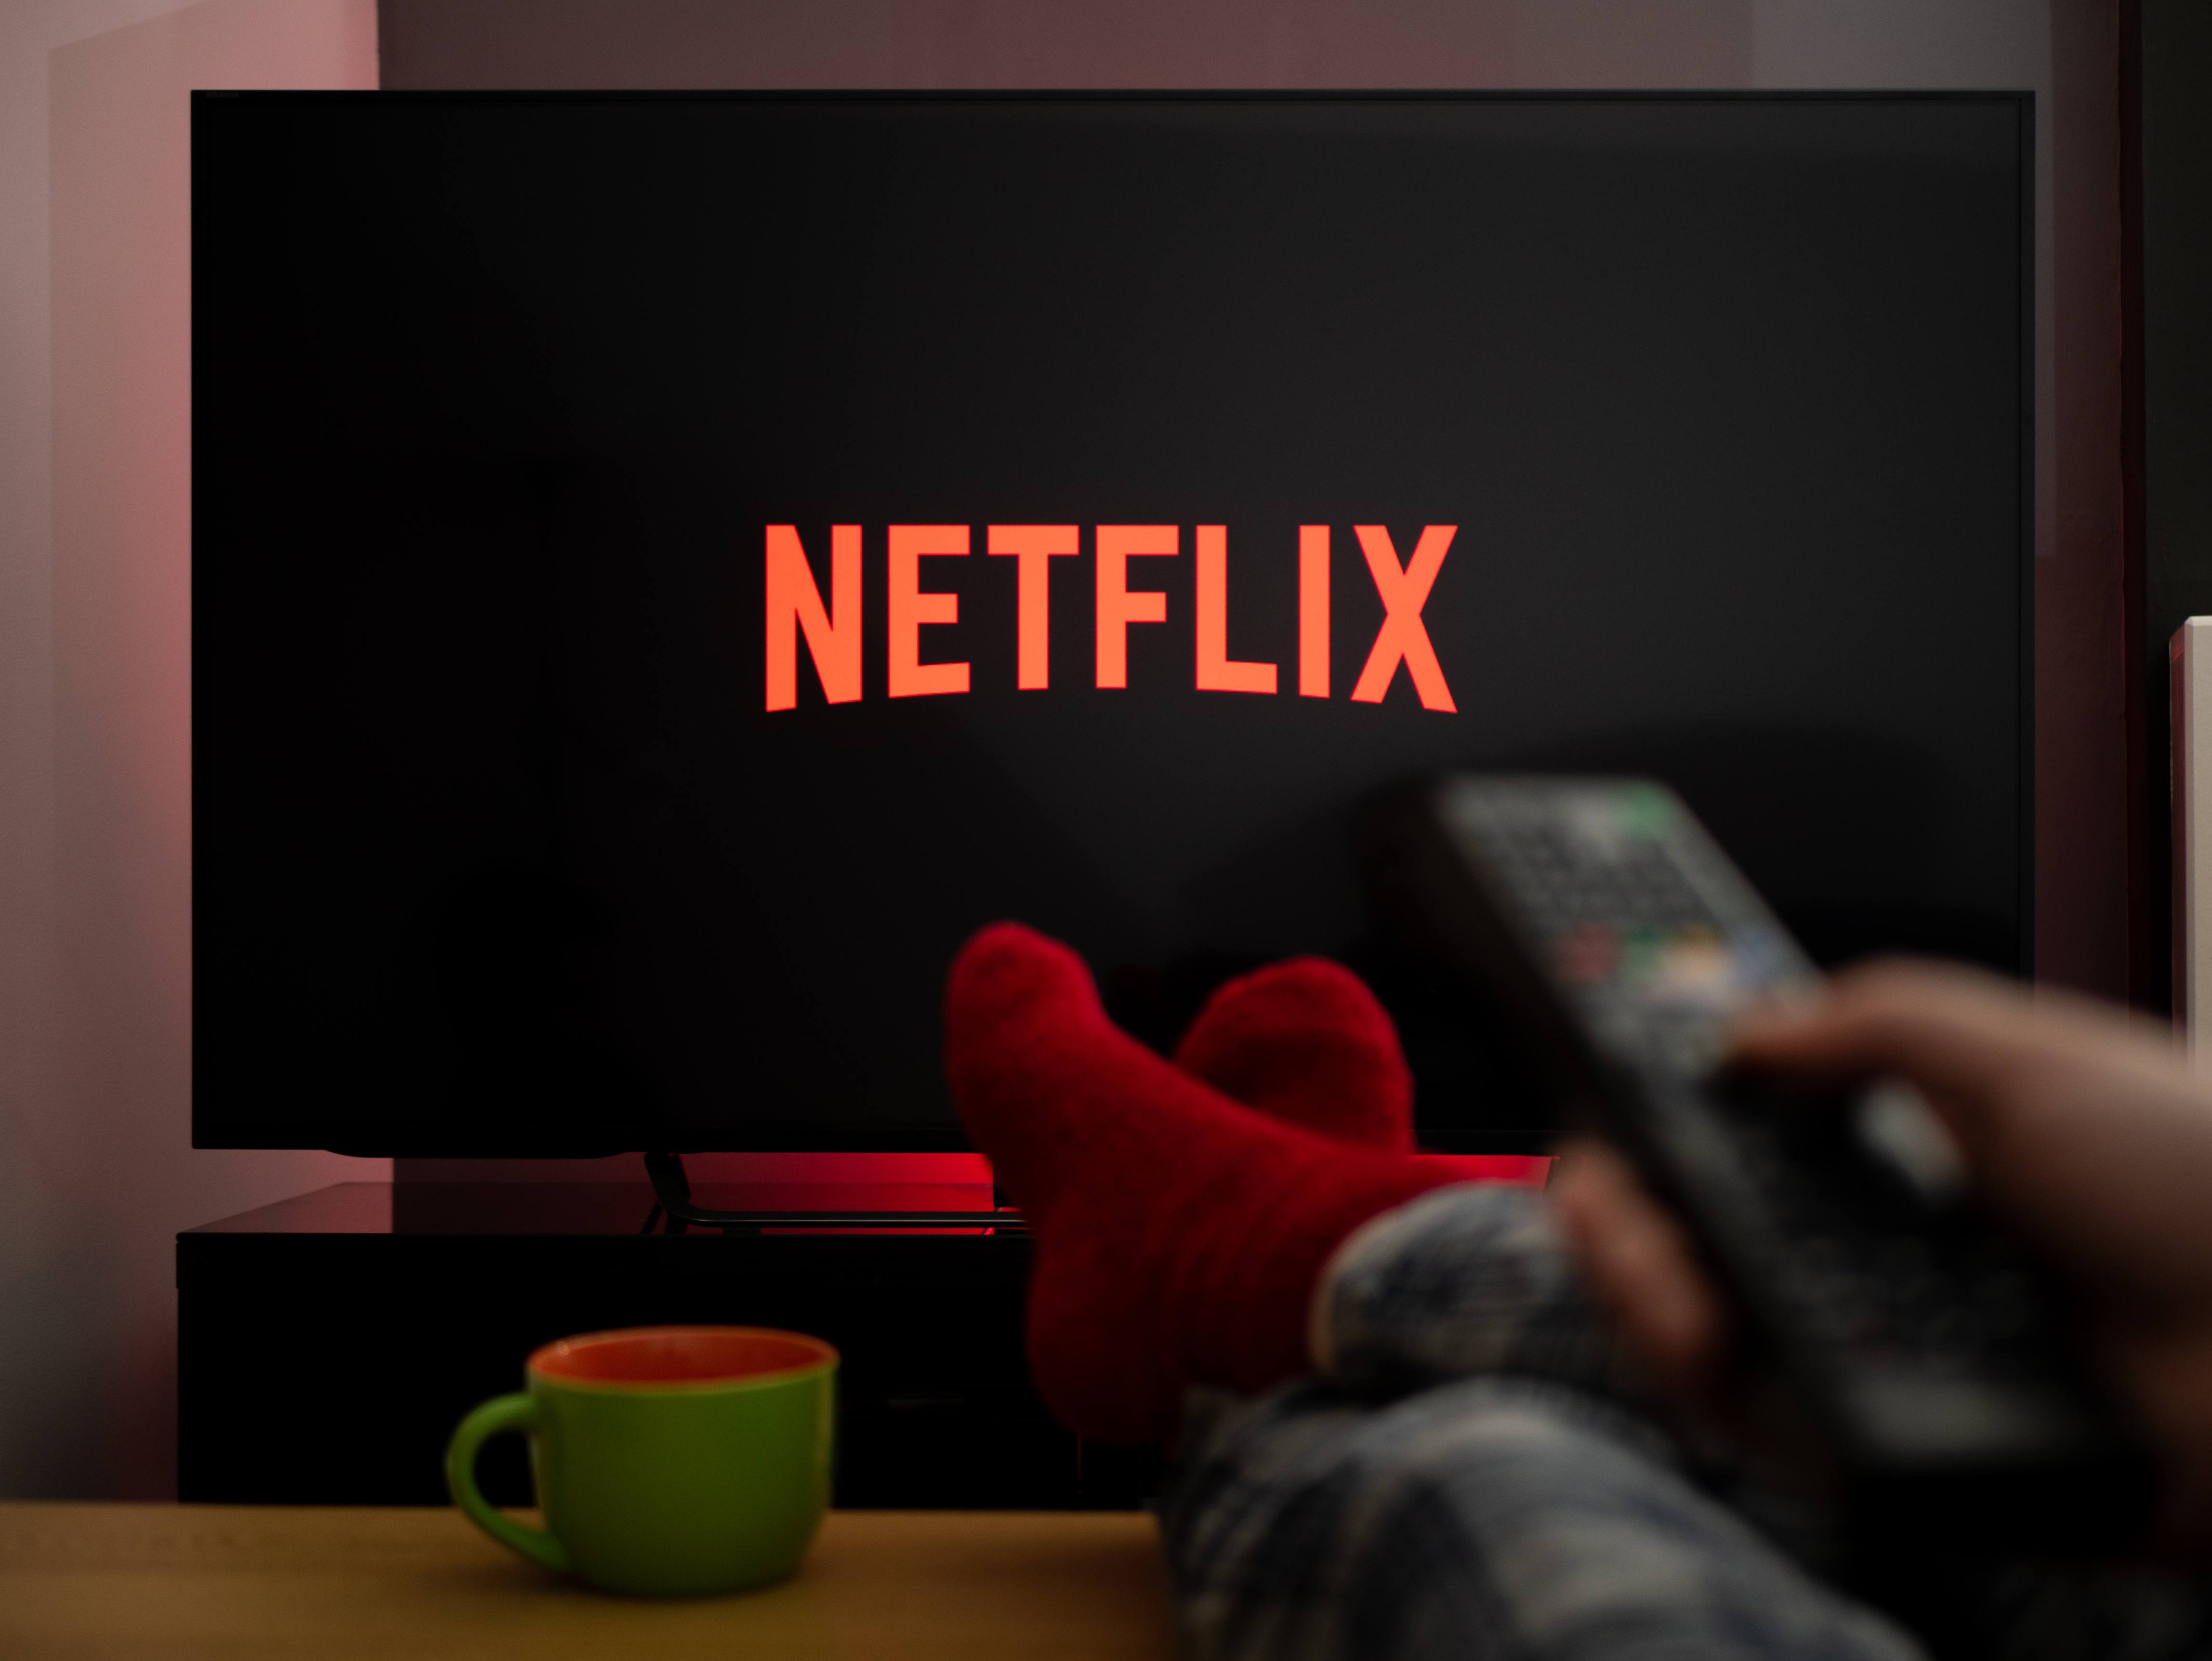 Study Shows More Than Half of Netflix Subscribers Share Passwords